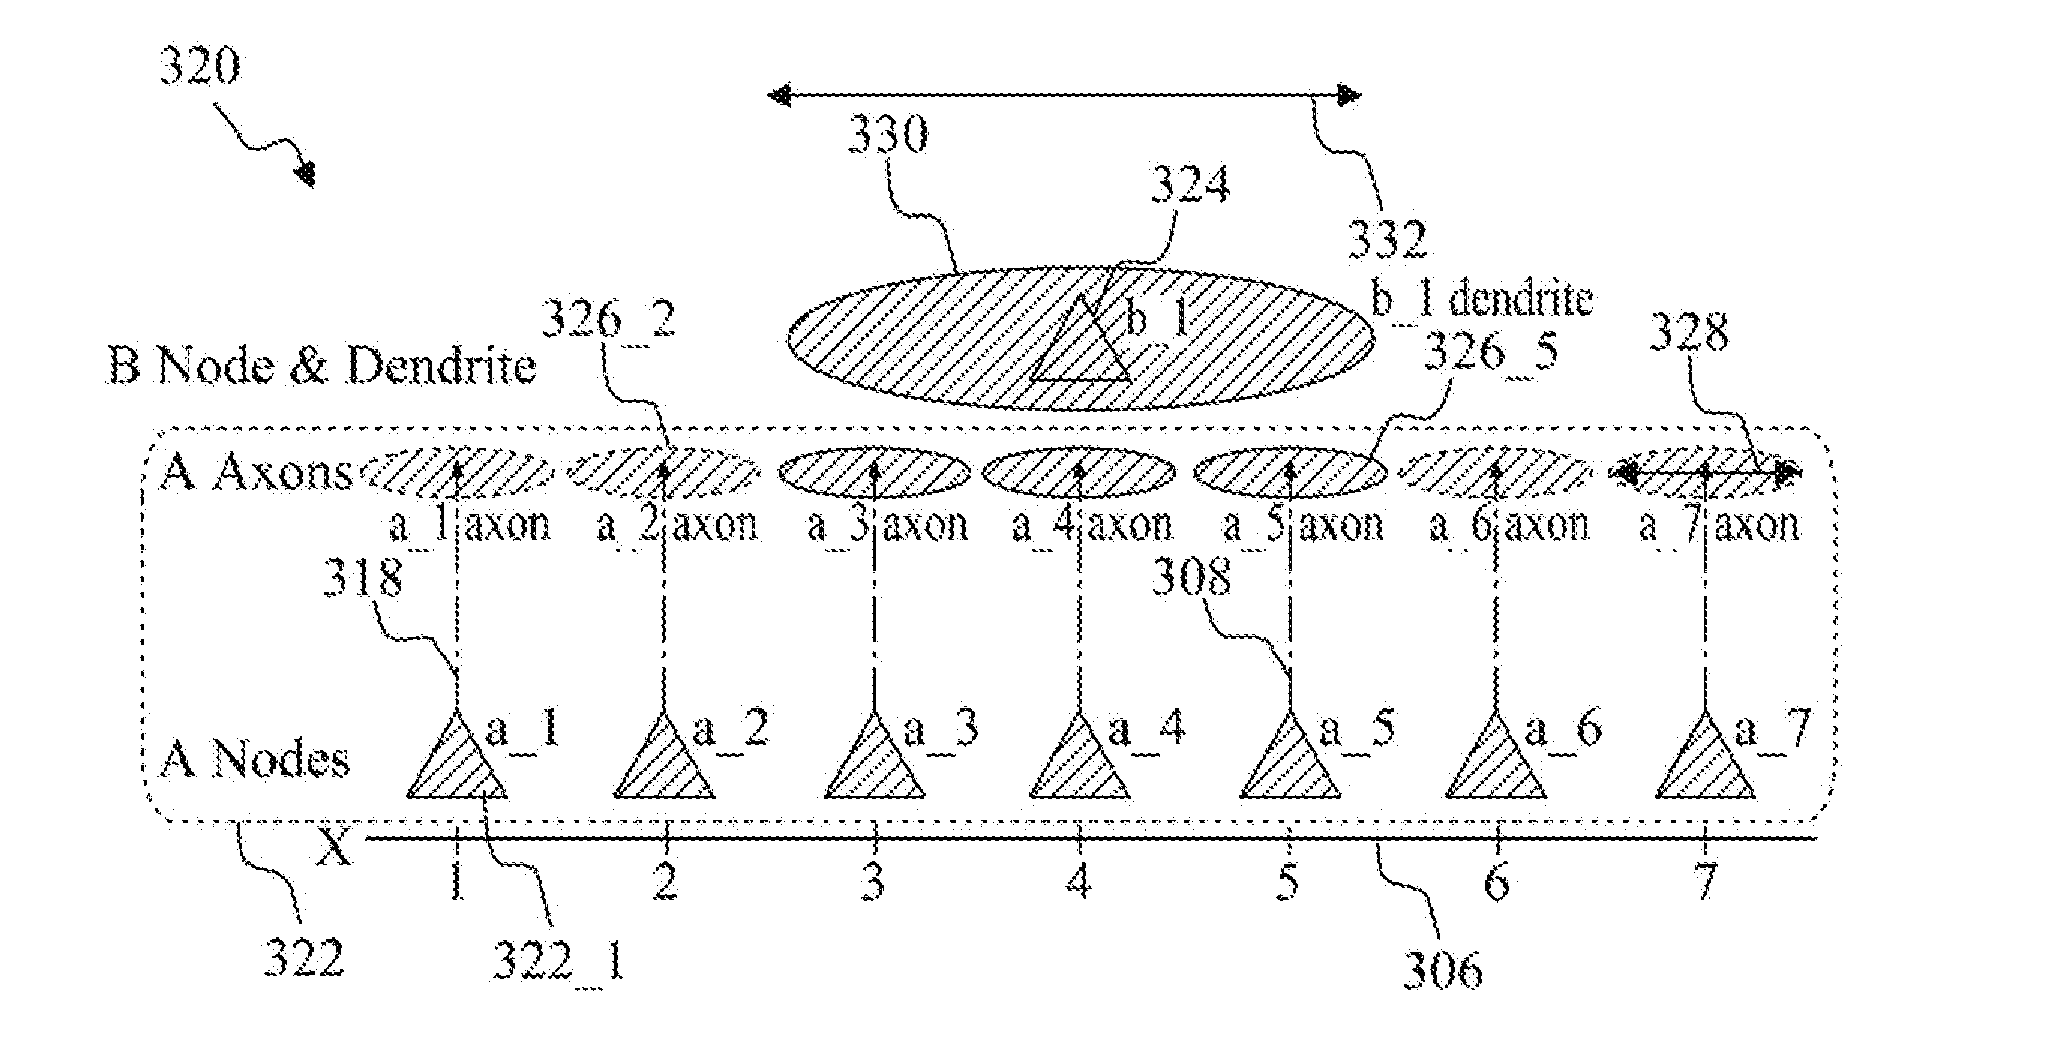 Tag-based apparatus and methods for neural networks